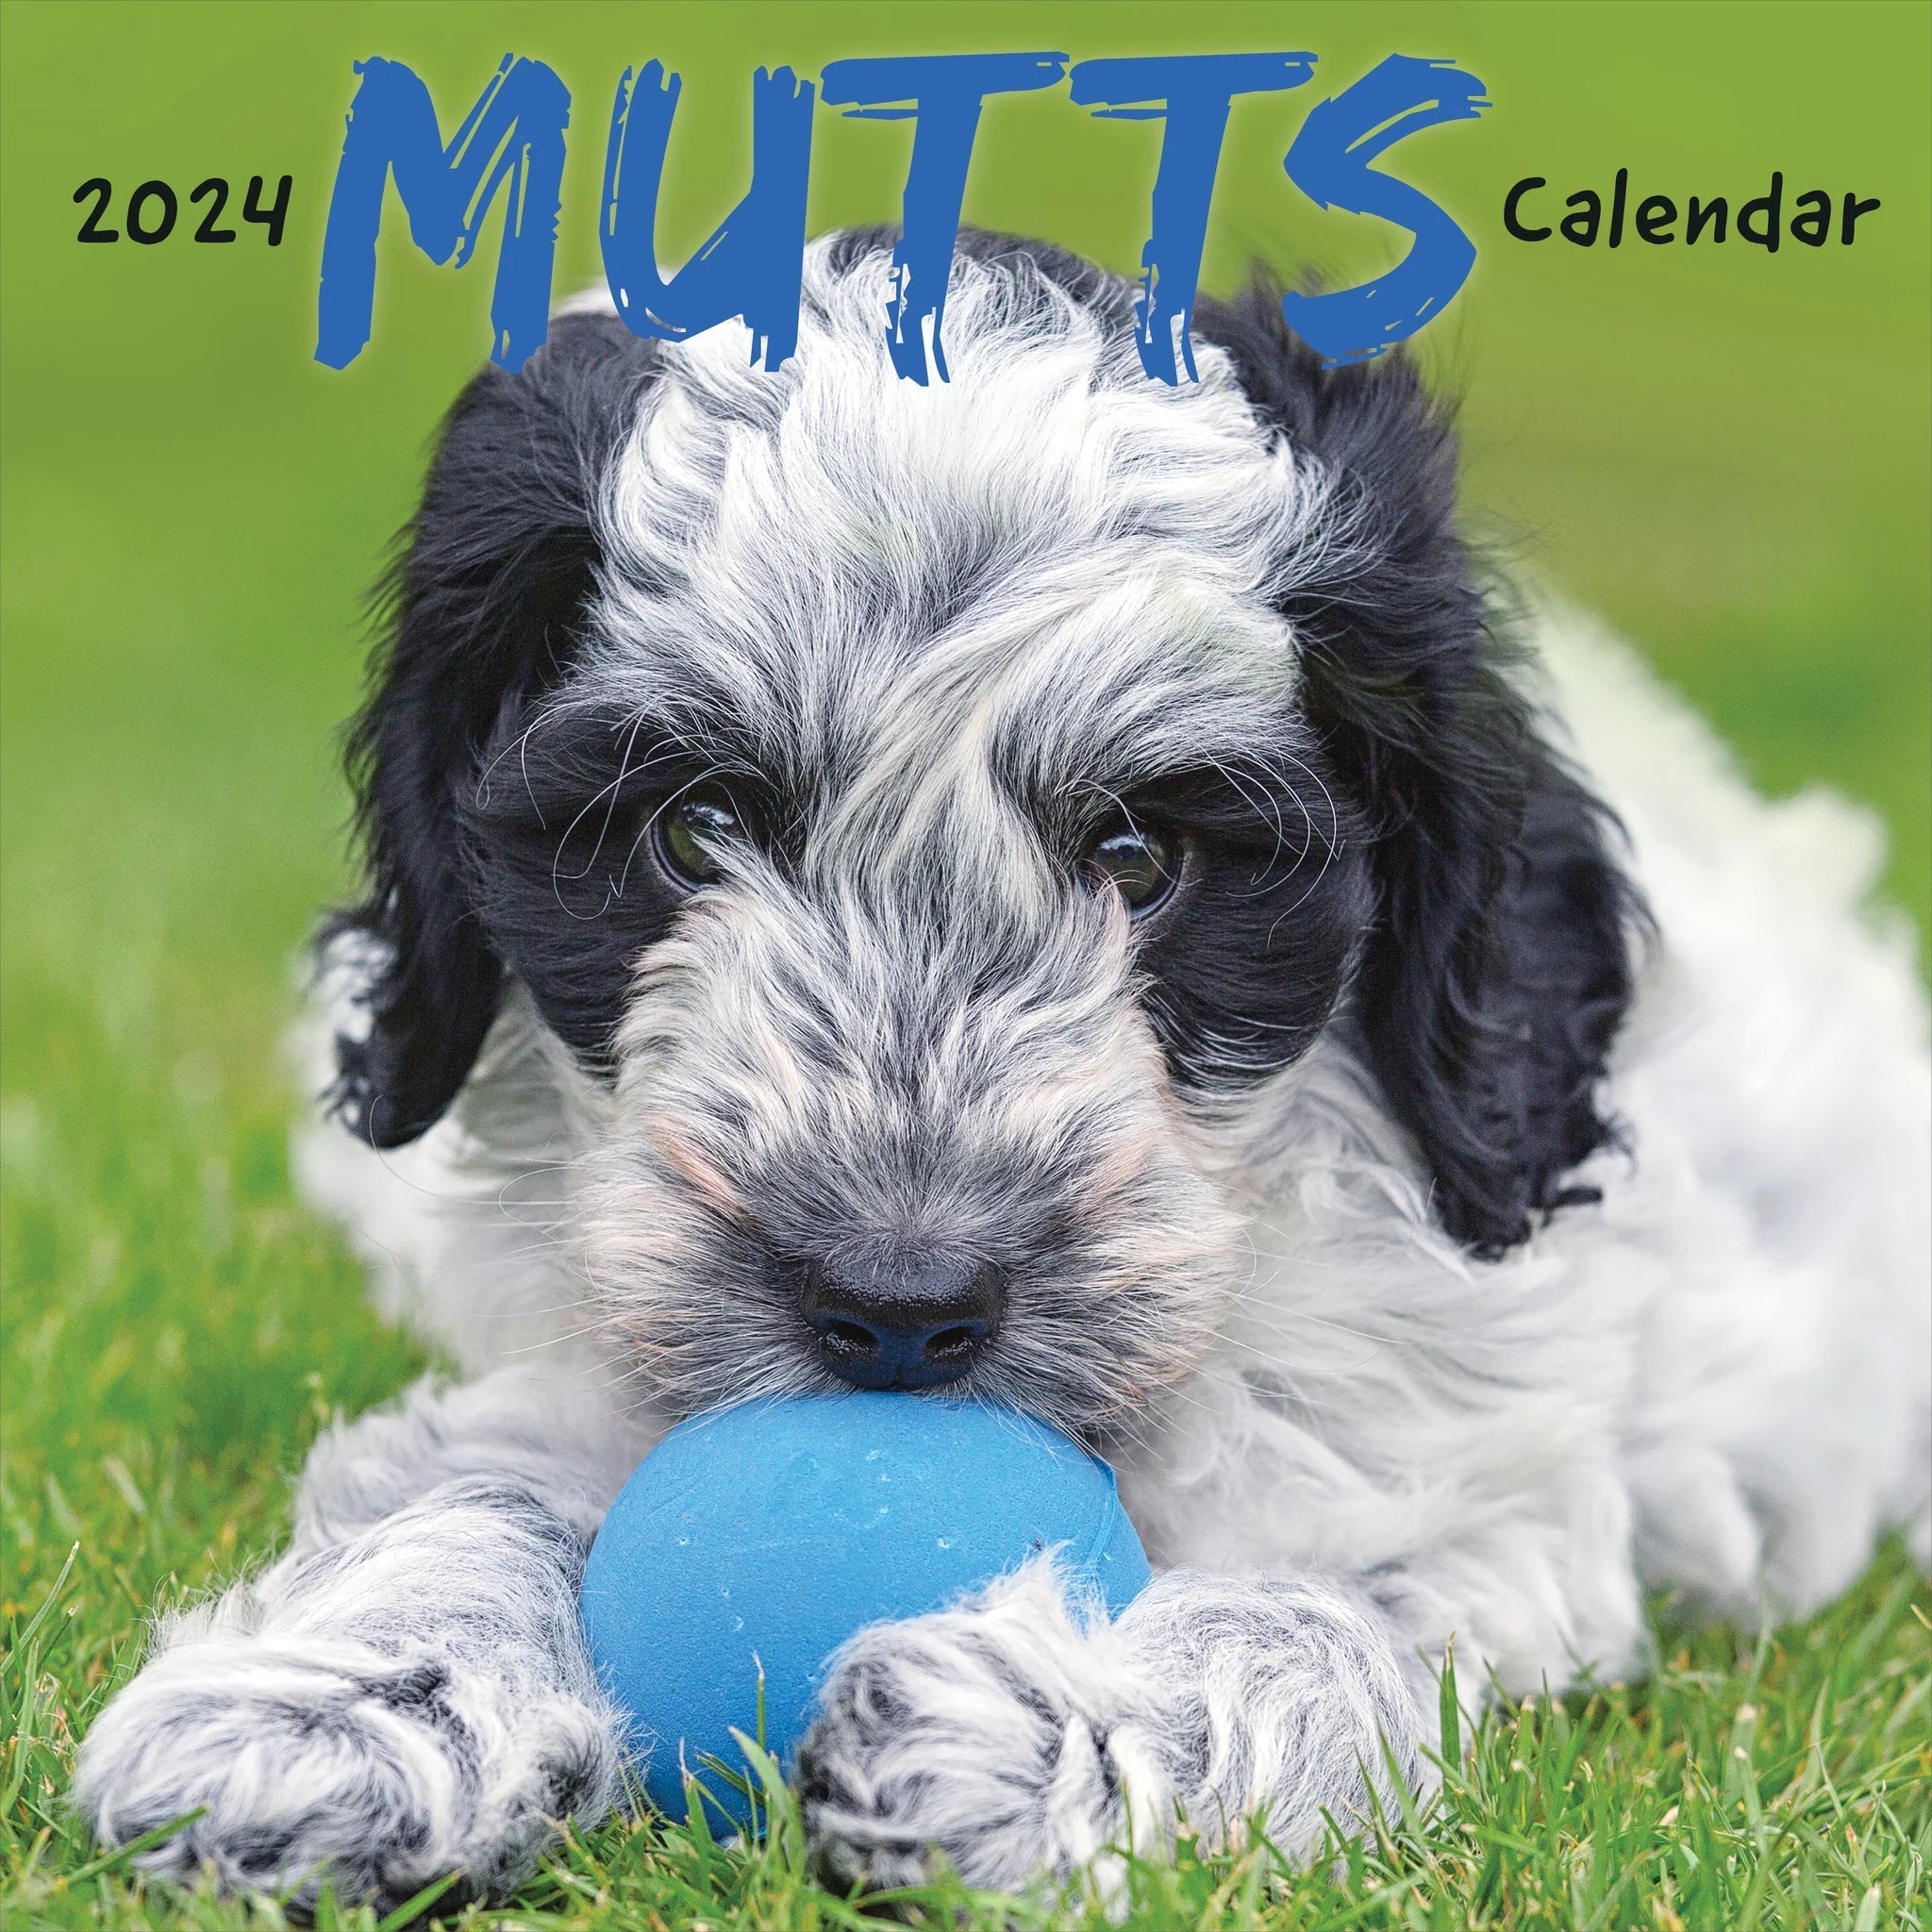 2024 Mutts (by TF Publishing) - Square Wall Calendar